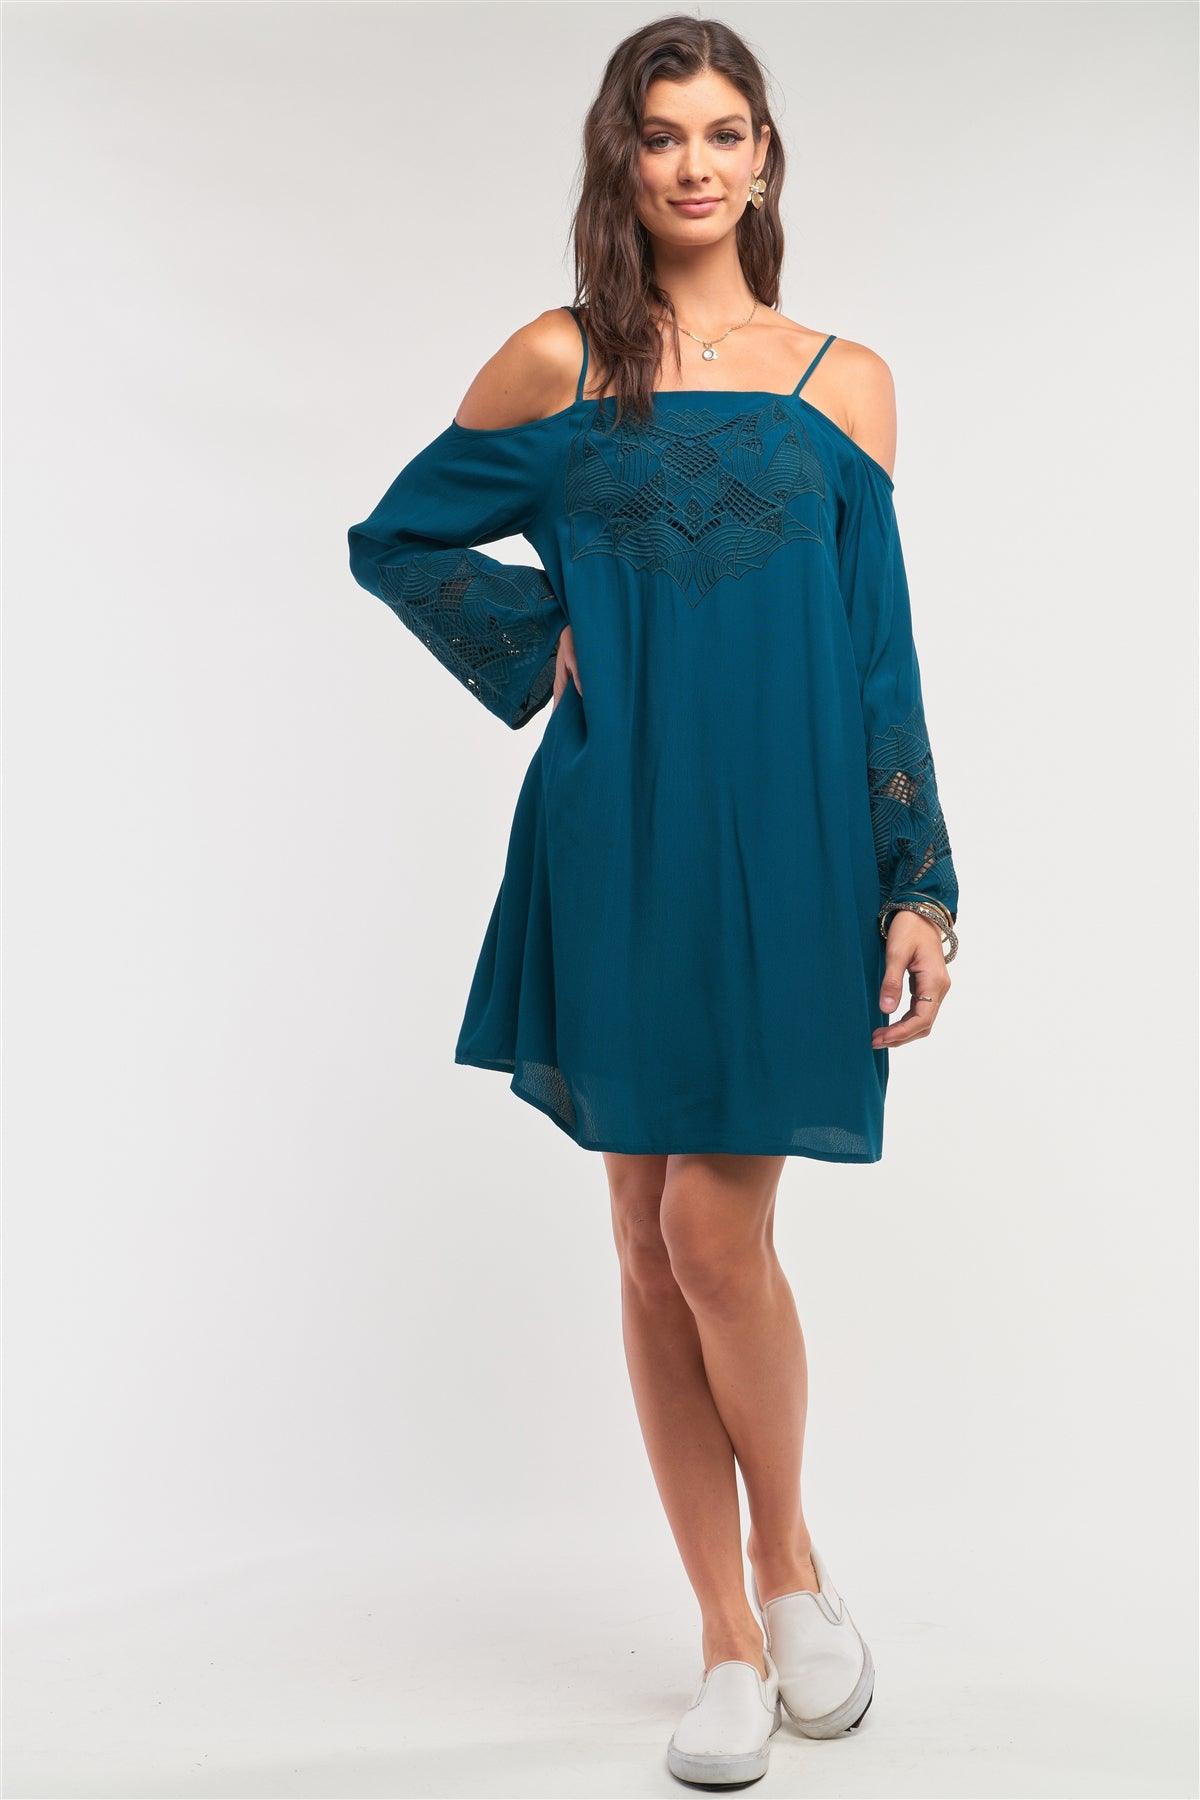 Teal Green Off-The-Shoulder Flare Long Sleeve Square Neck Crochet Embroidery Mini Dress /1-2-2-1